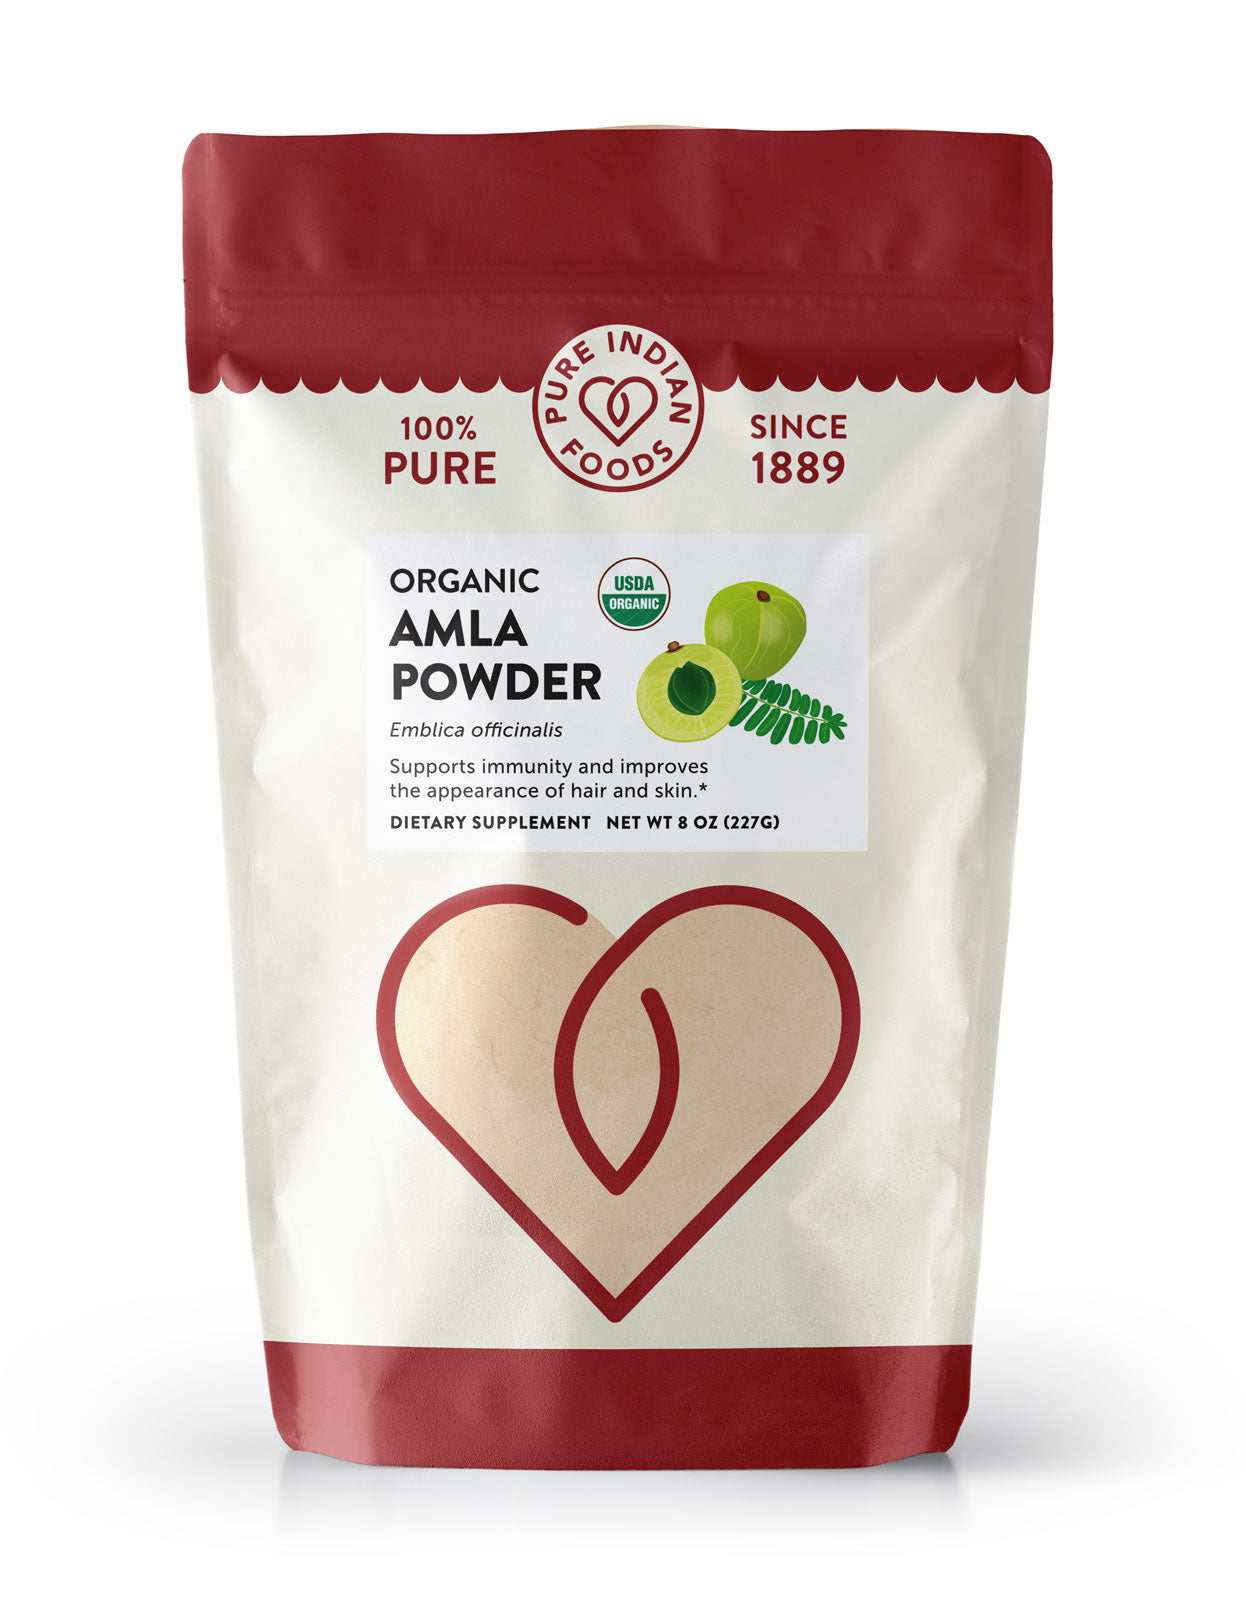 Bag of Pure Indian Foods Organic Amla Powder, a dietary supplement made from Indian Gooseberries (Amalaki). Label says it supports immunity, and is good for Hair and Skin and can be taken internally or applied externally.